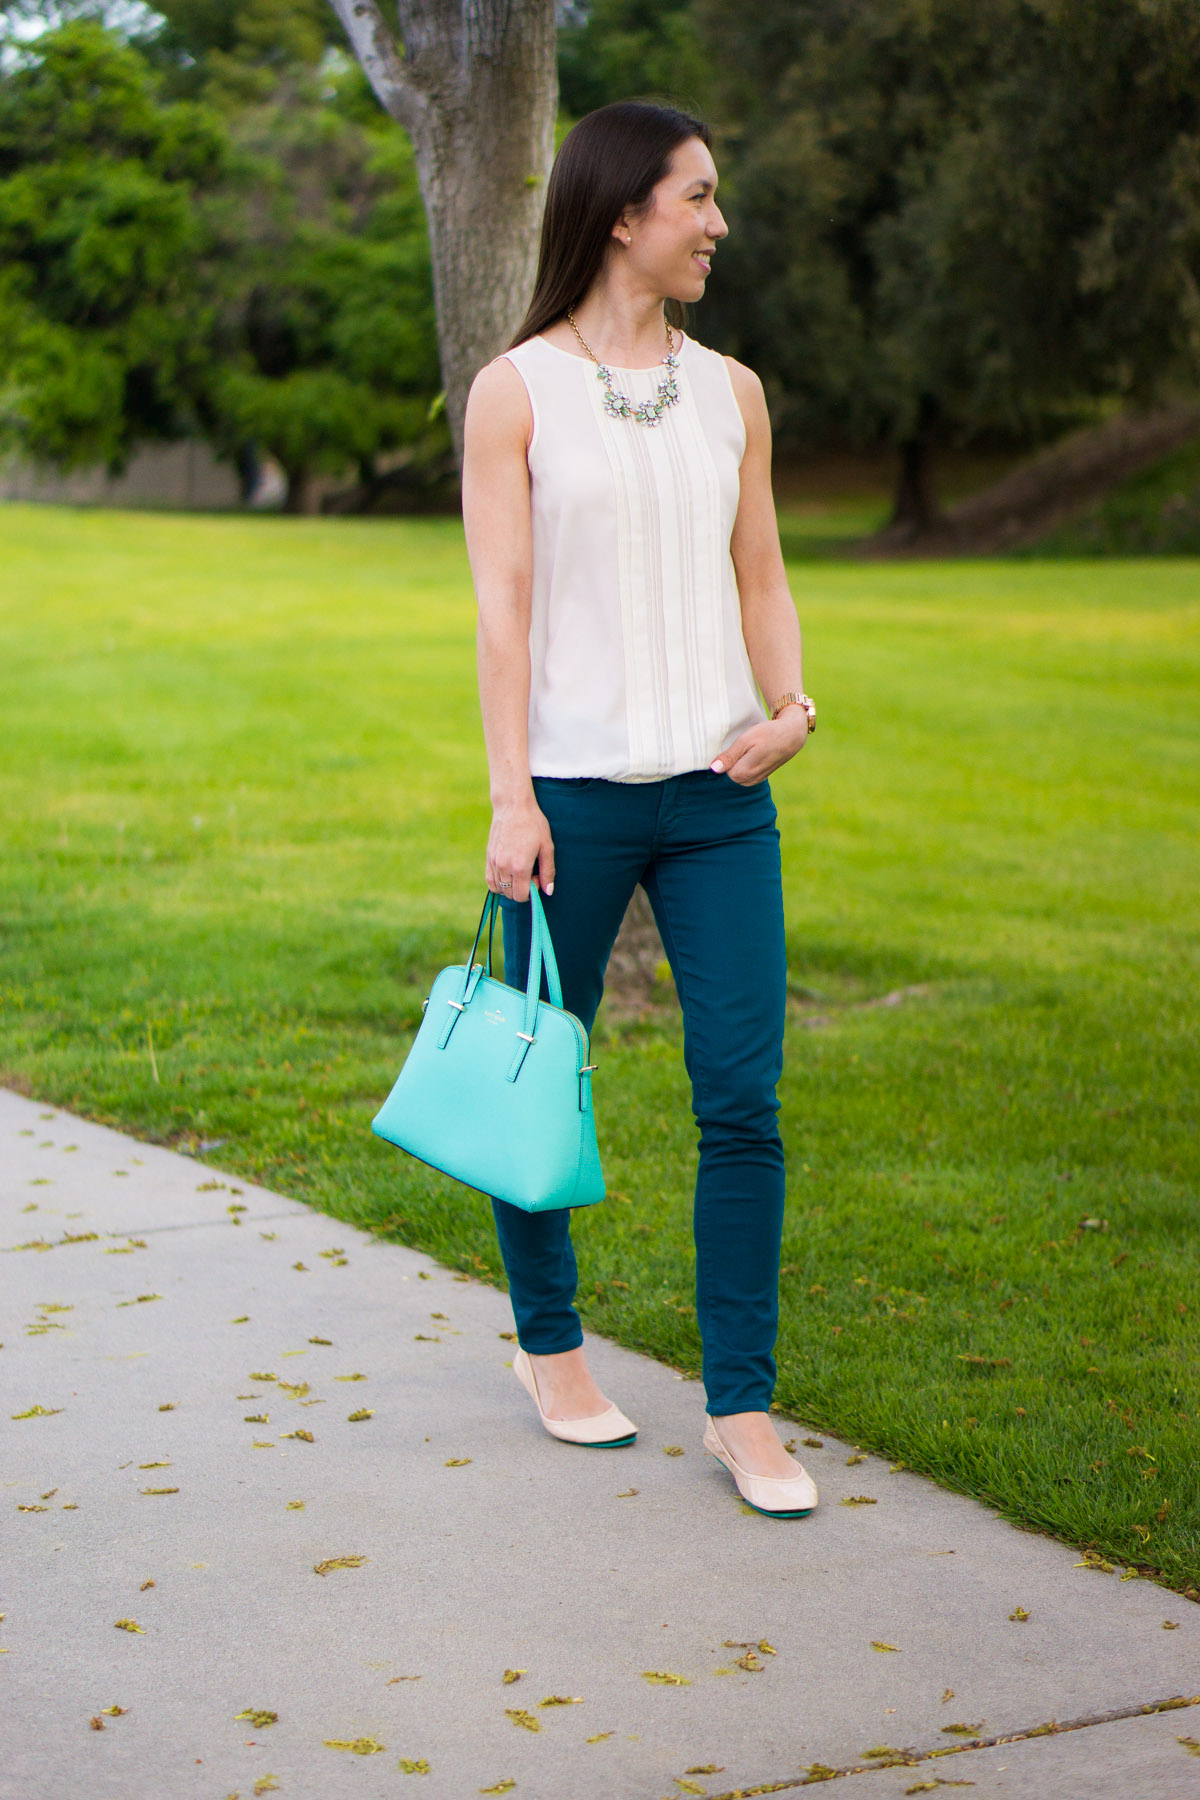 Teal jeans outfit